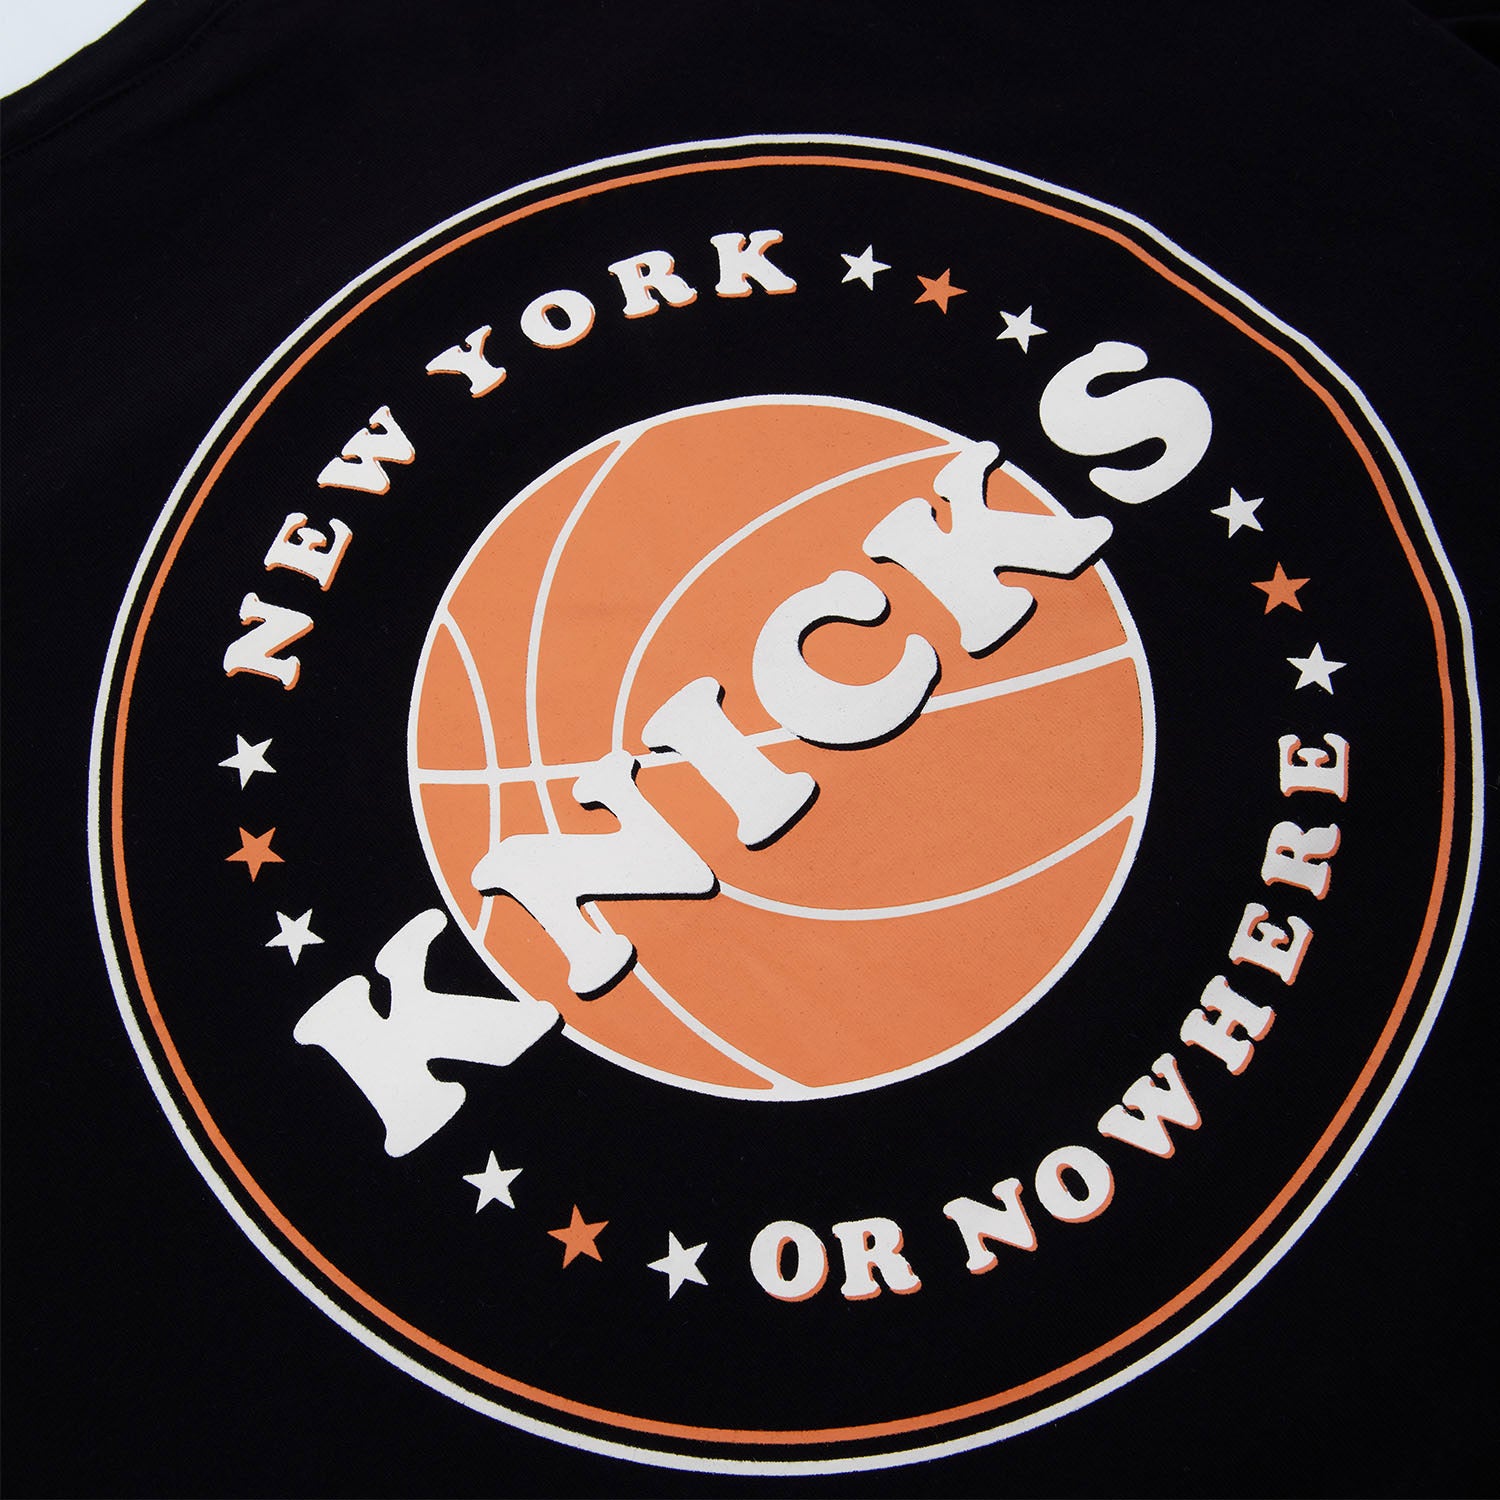 NYON x Knicks "Heyday" Tee In Black - Front View